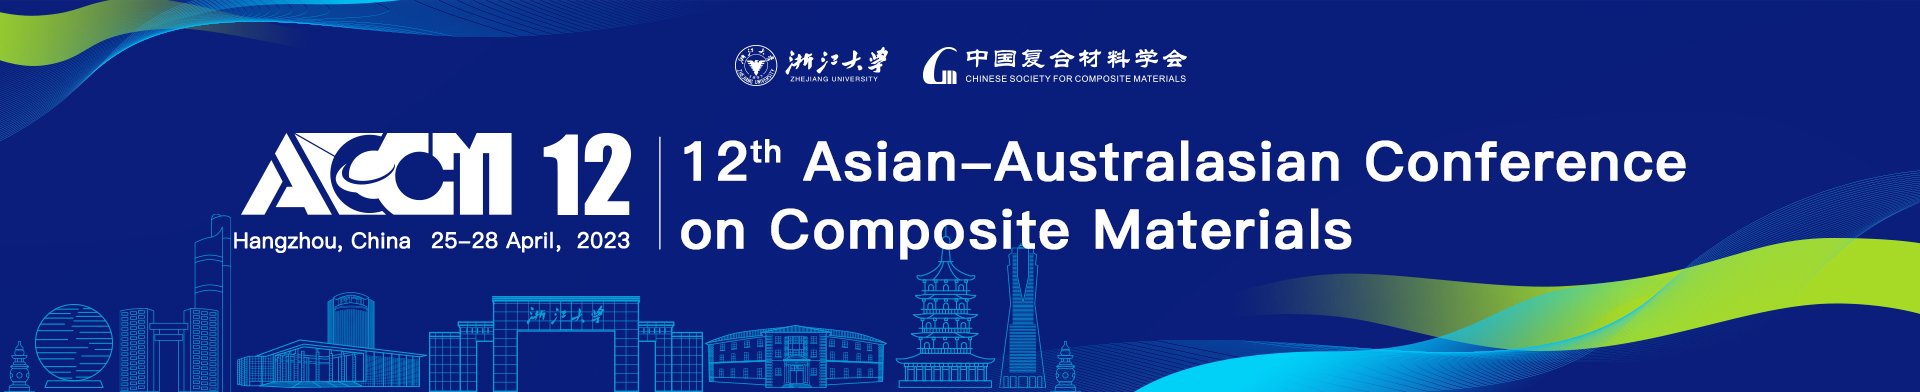 12th Asian-Australasian Conference on Composite Materials，ACCM12